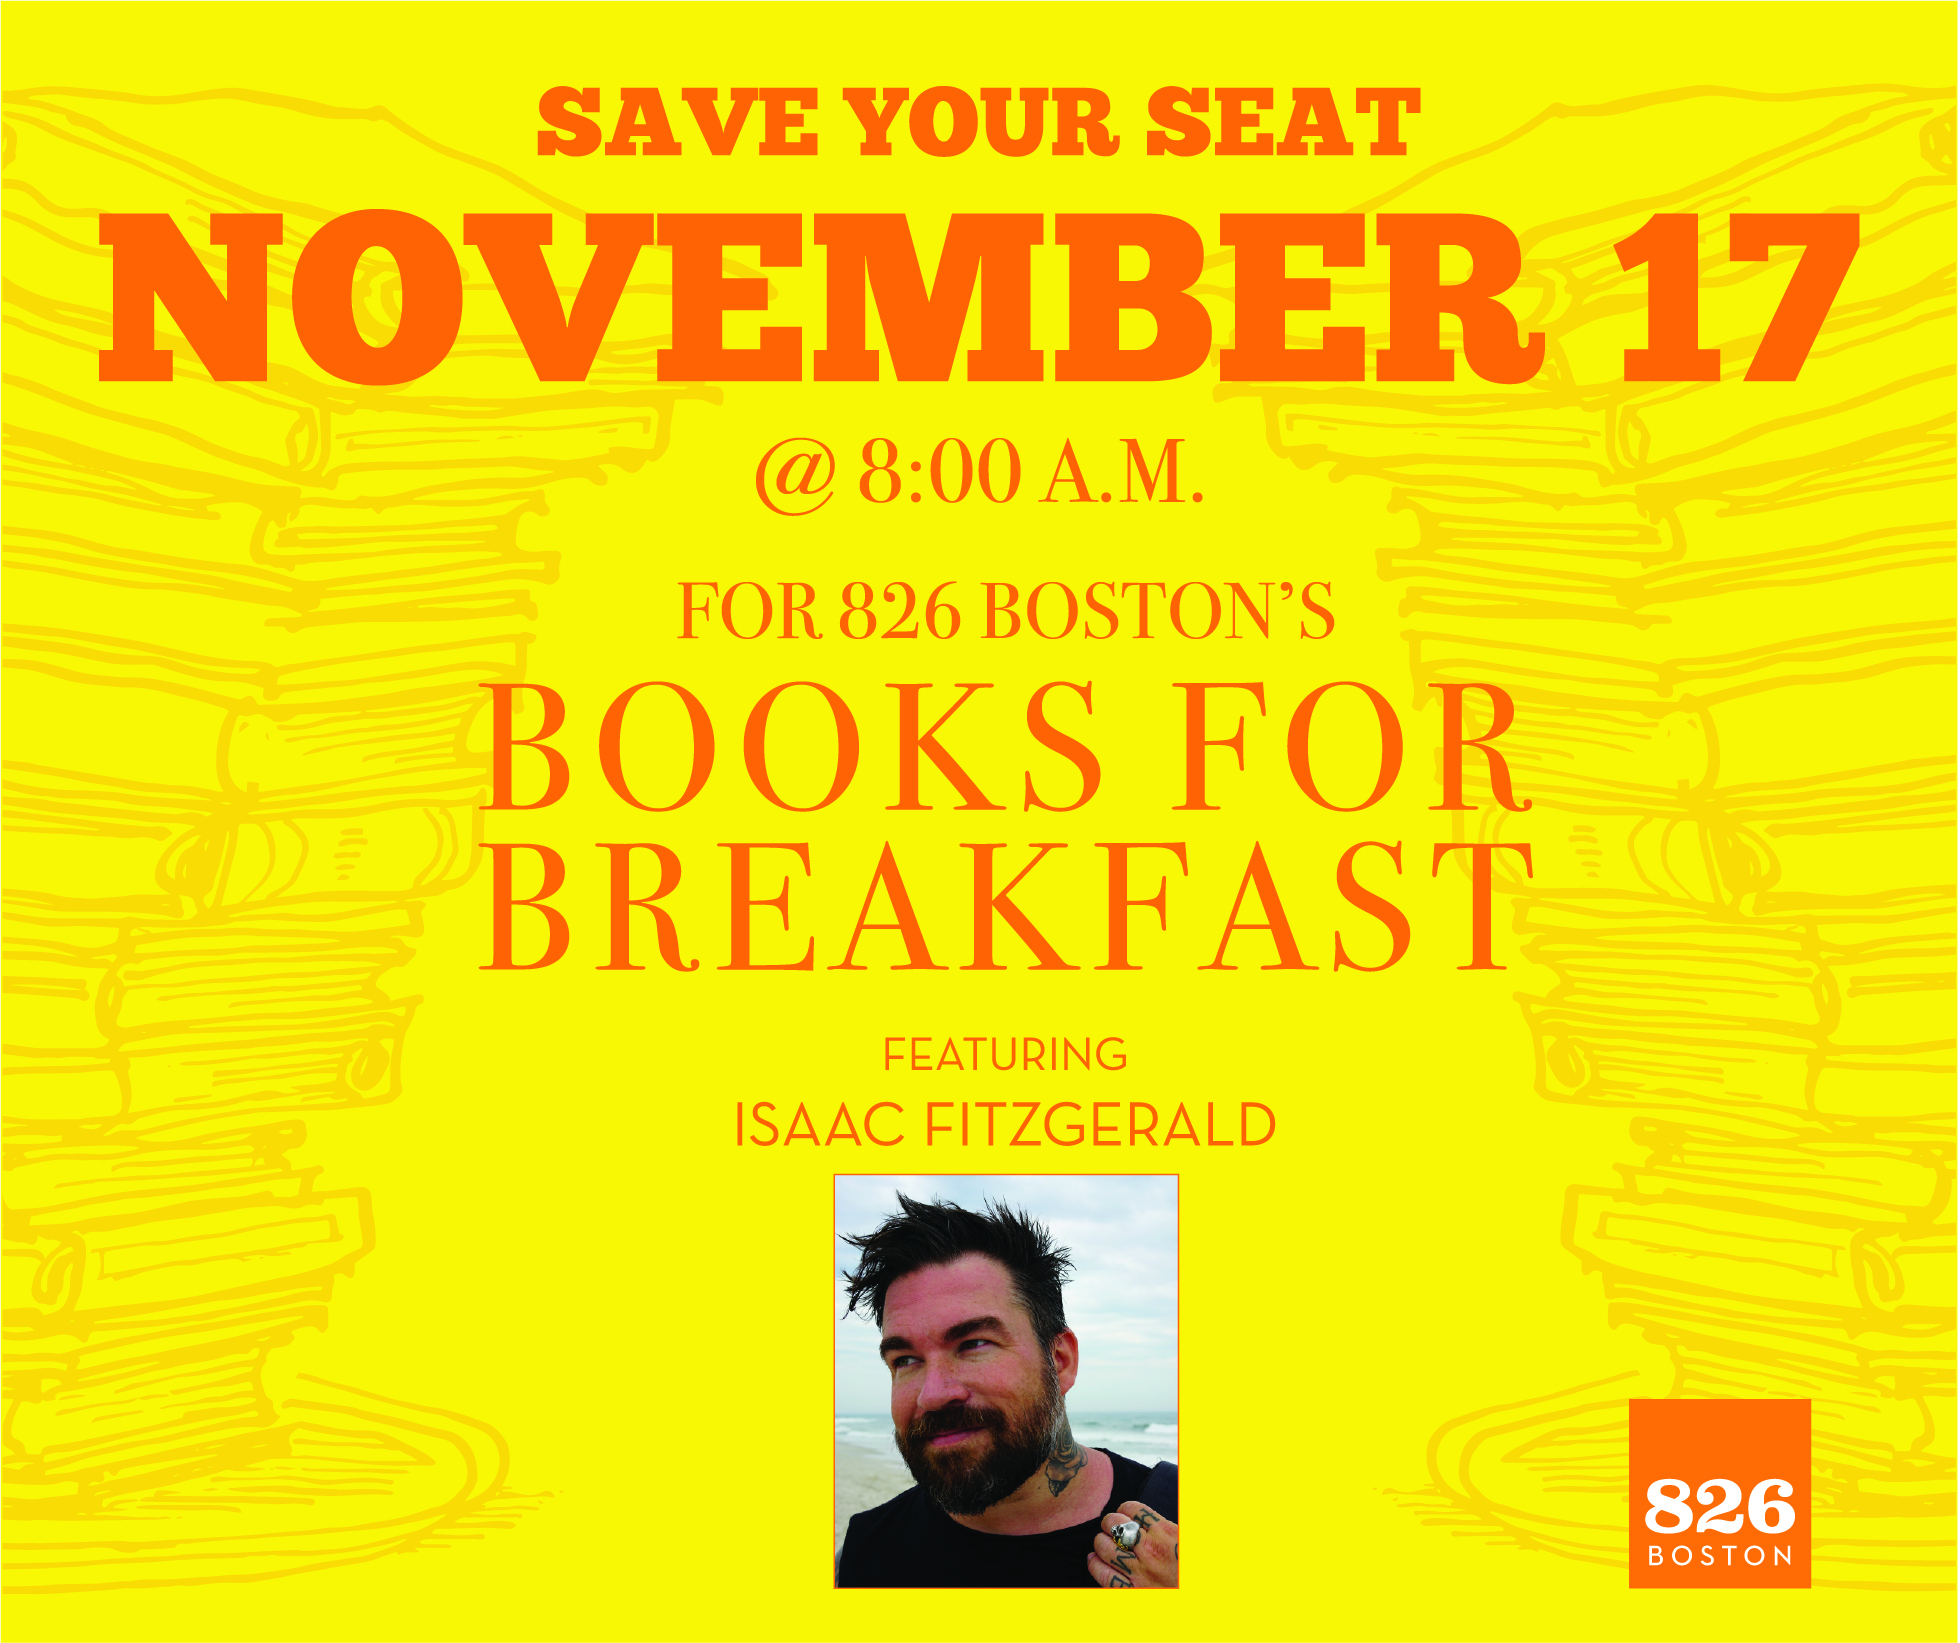 Yellow background with orange-colored text that reads: Save your seat November 17 at 8:00 AM for 826 Boston’s Books for Breakfast featuring Issac Fitzgerald. Headshot of Issac Fitzgerald at the bottom of the image. 